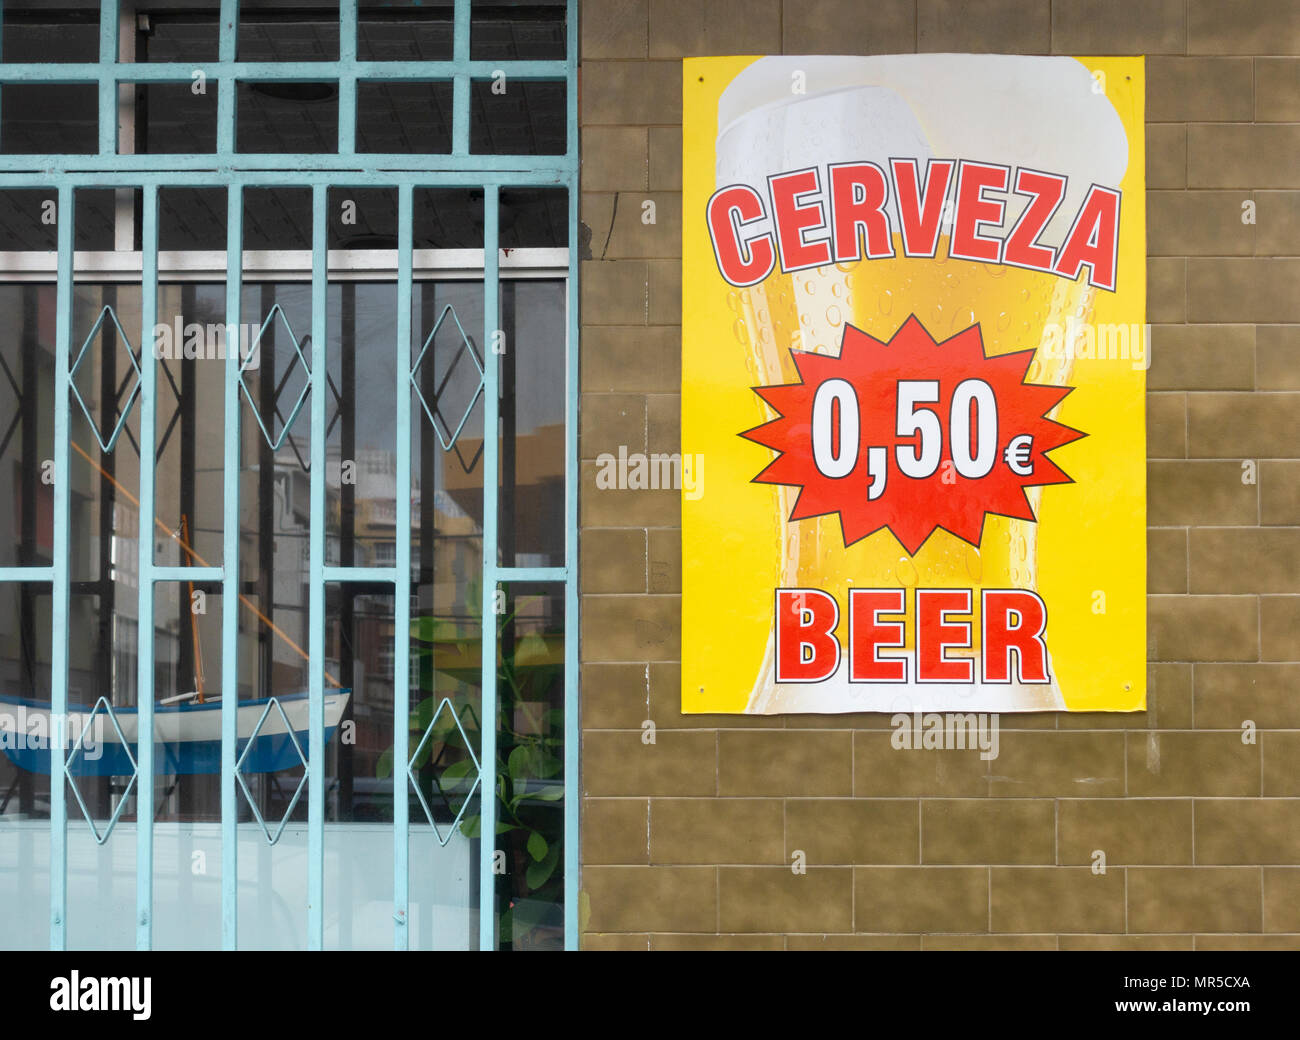 Cheap Cerveza (Beer) sign outside bar in Spain. Stock Photo